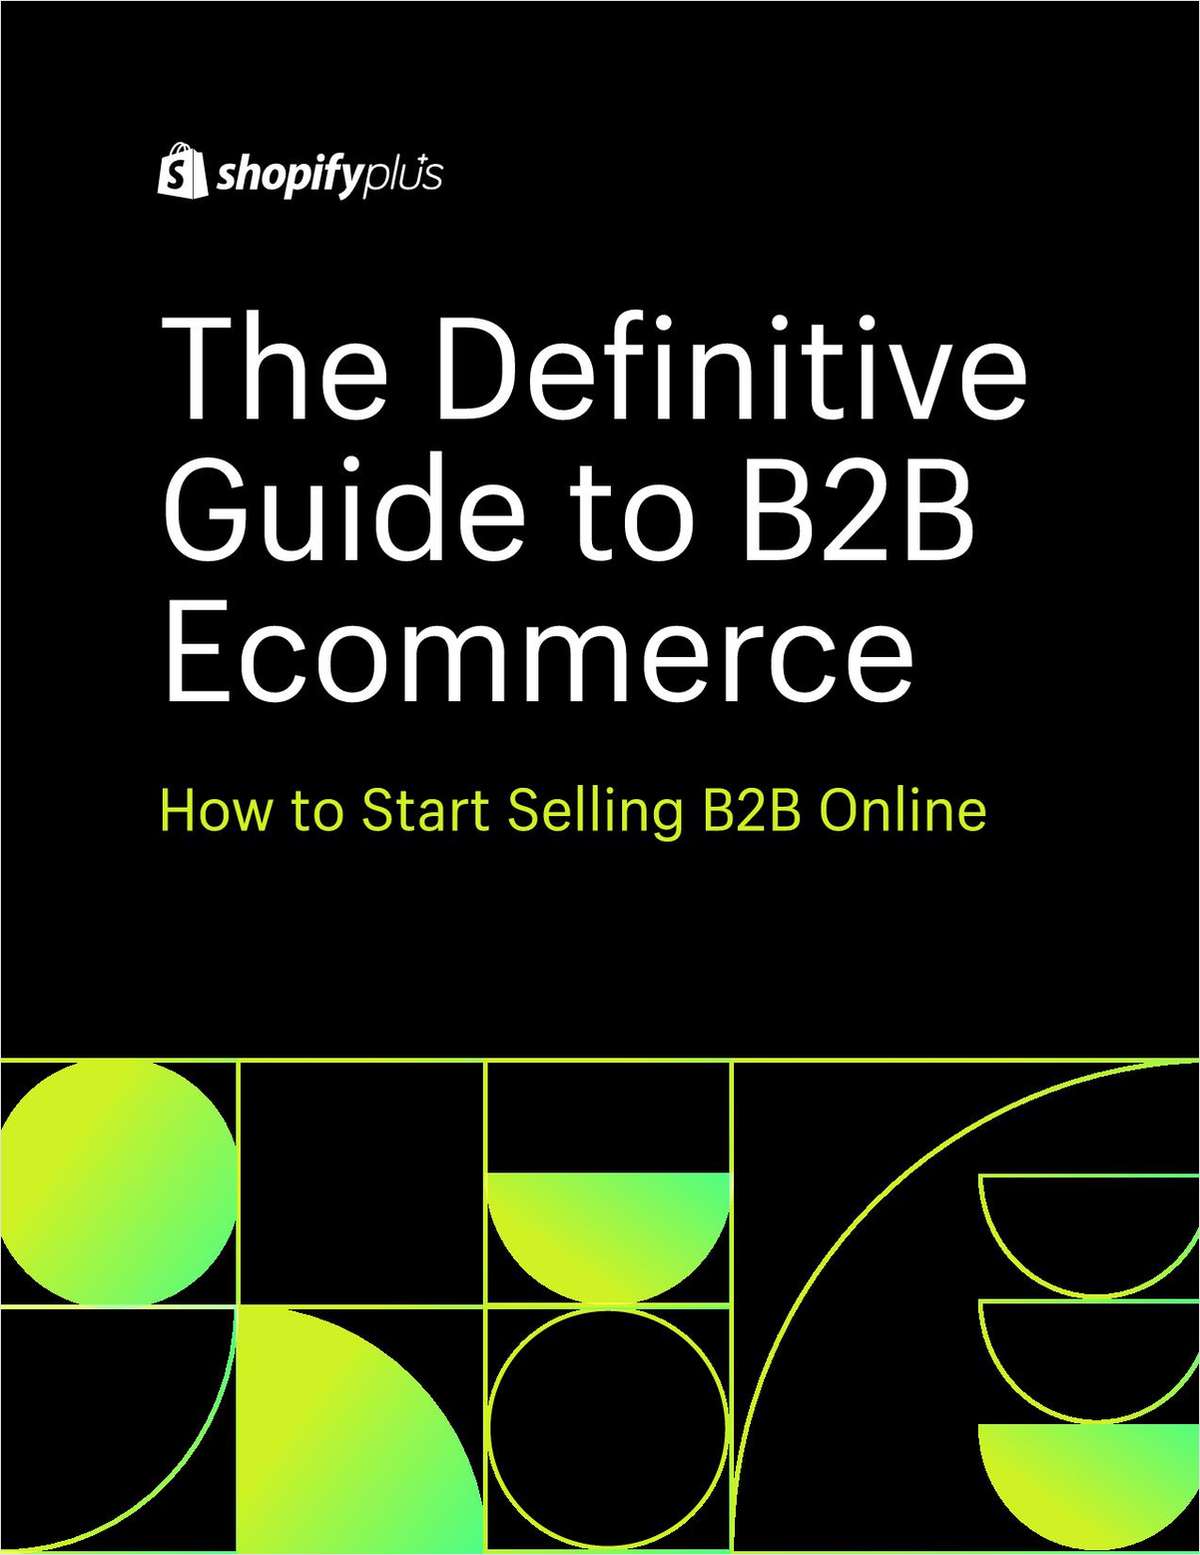 How to Start Selling B2B Online - The Definitive Guide